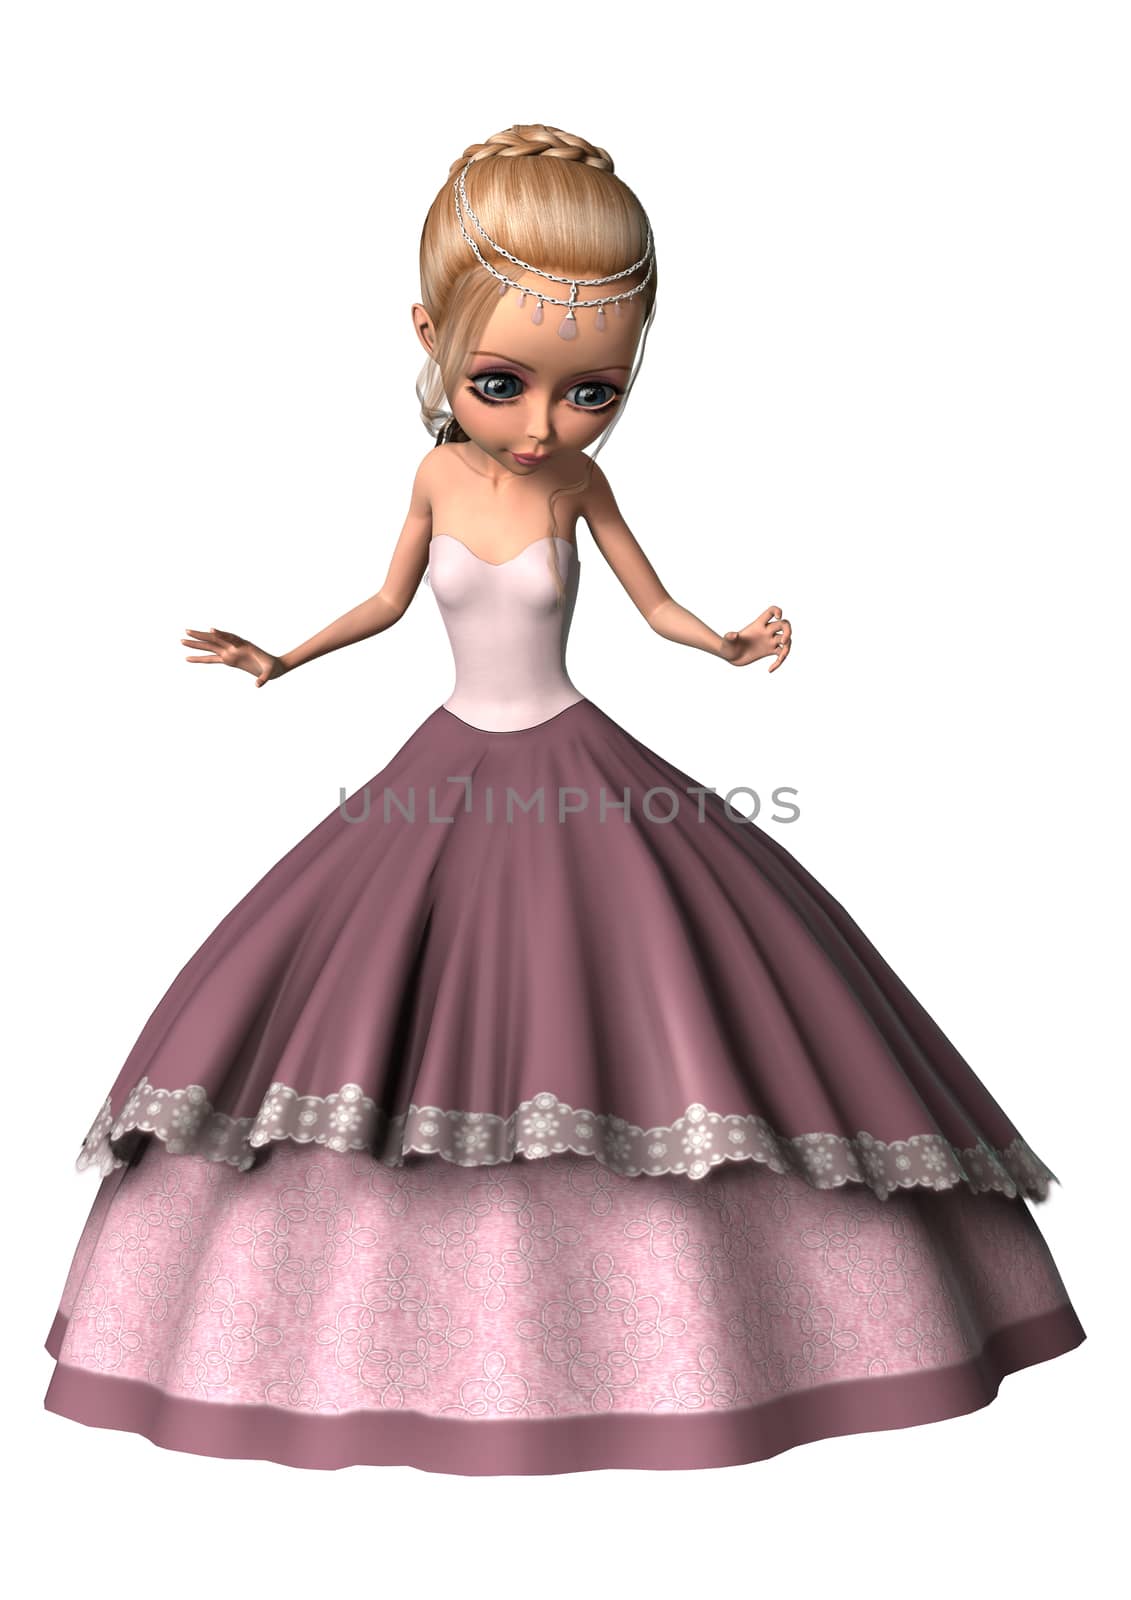 3D digital render of acute little princess in a pink dress isolated on white background